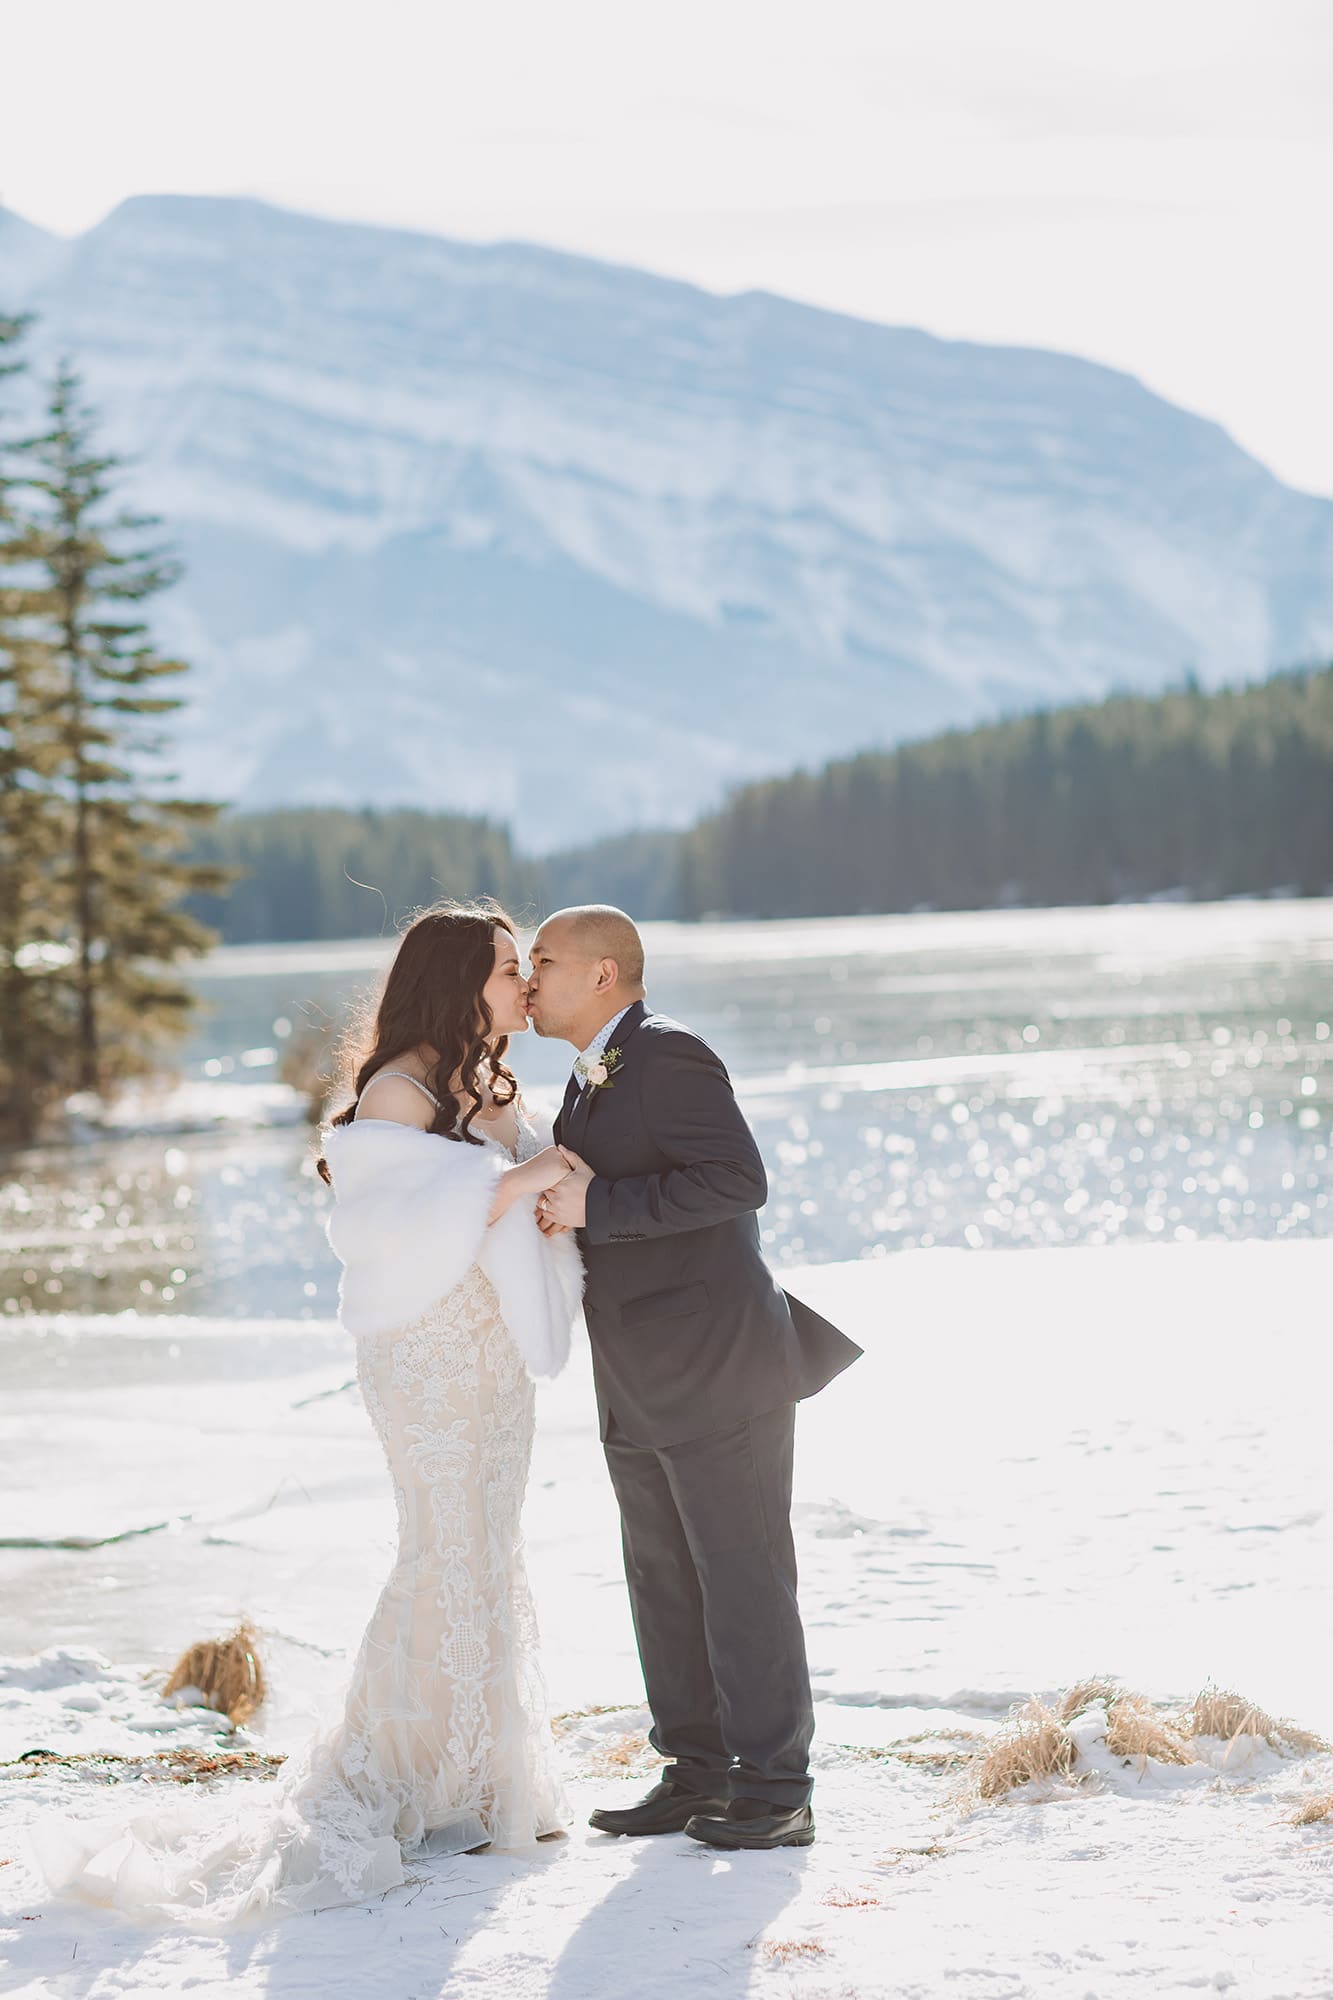 outdoor wedding ceremony overlooking sparkly frozen Two-Jack Lake